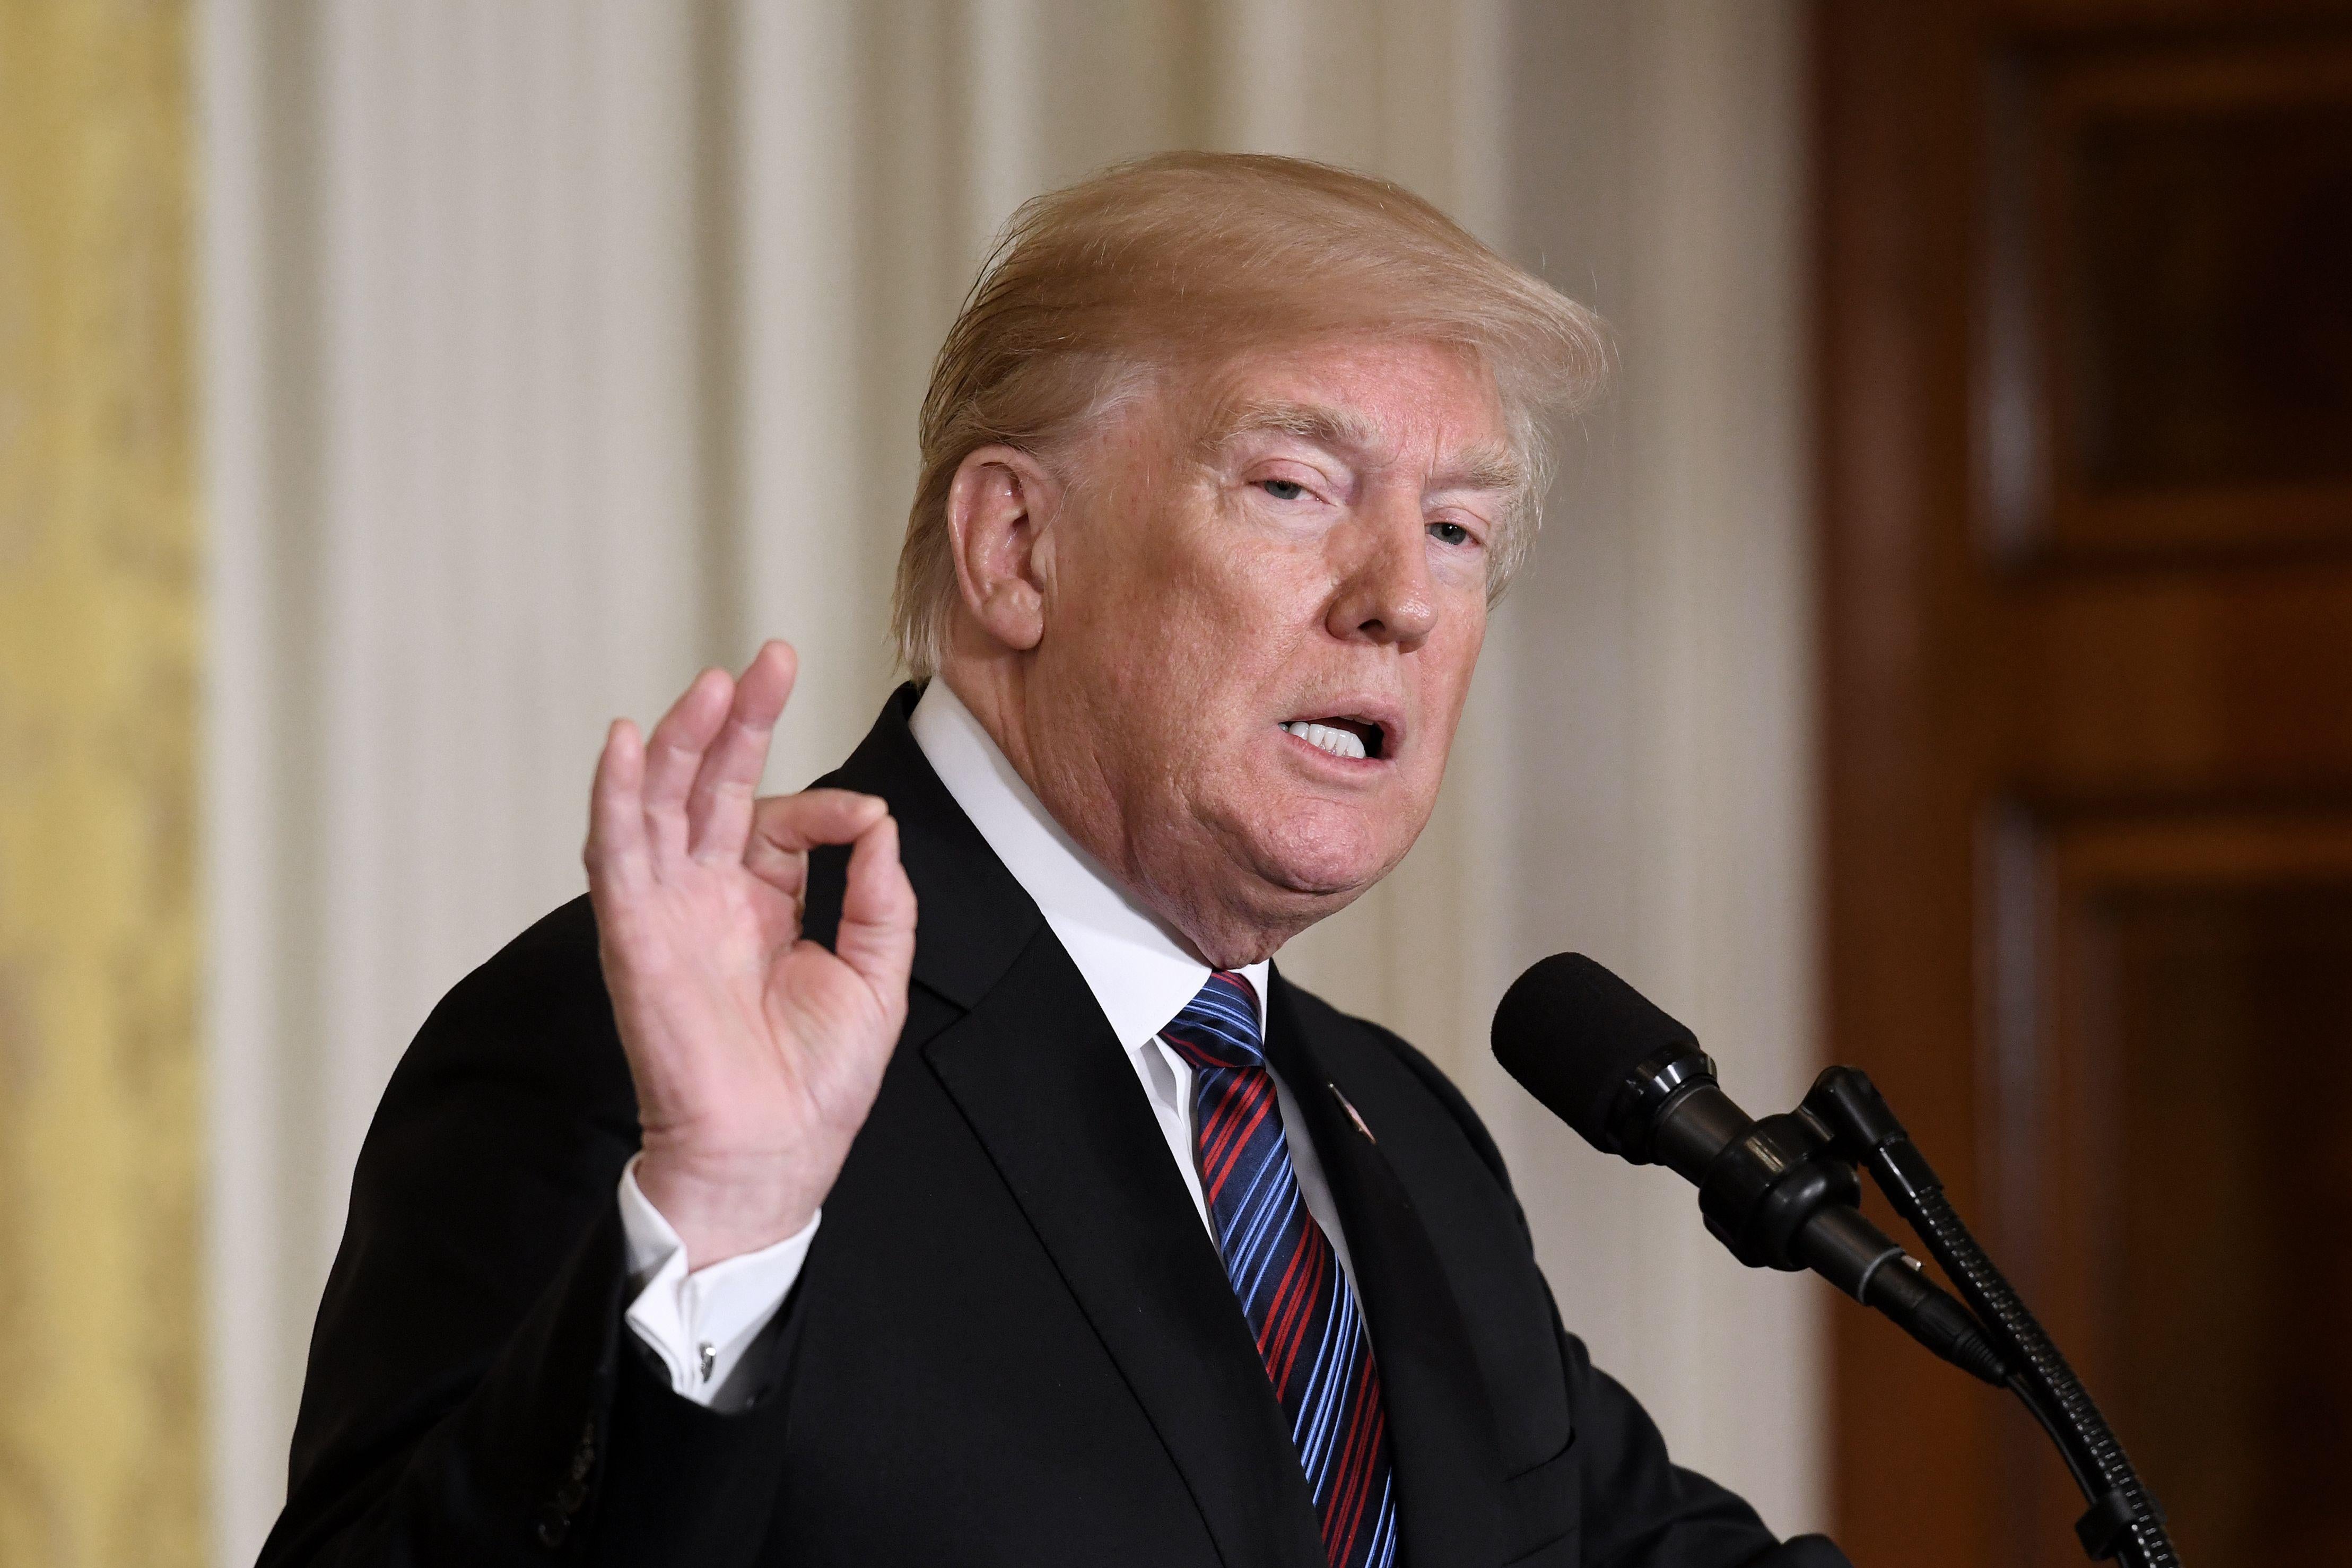 President Donald Trump speaks during a joint press conference with three Baltic States (Estonia, Latvia and Lithuania) in the East Room of the White House on April 3, 2018 in Washington, D.C. 